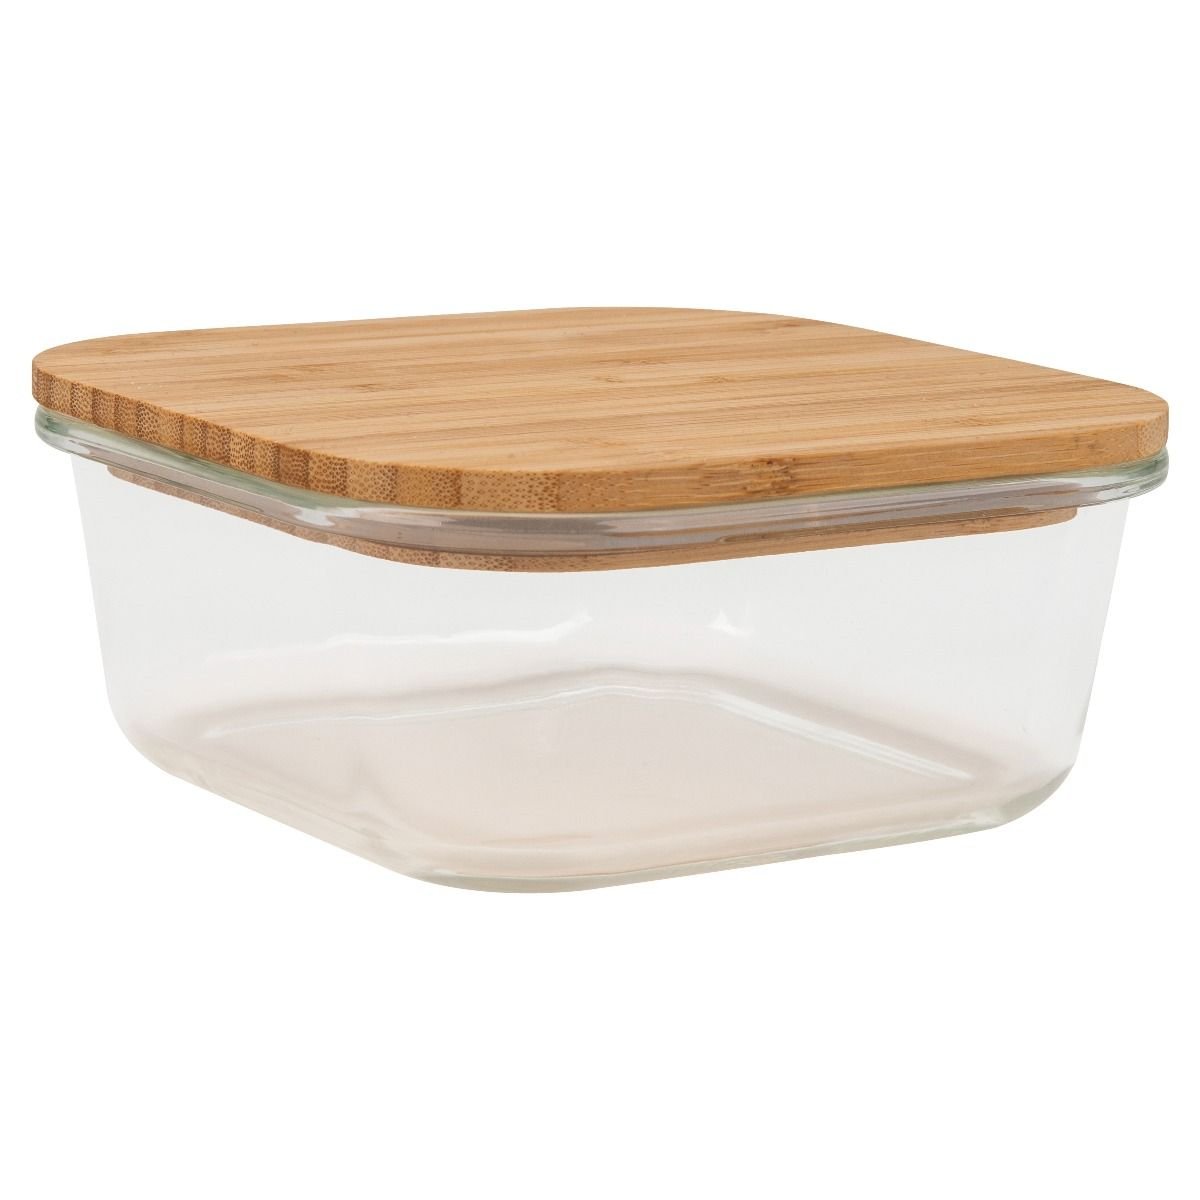 Tabletops Unlimited Glass Food Storage - 12 ct